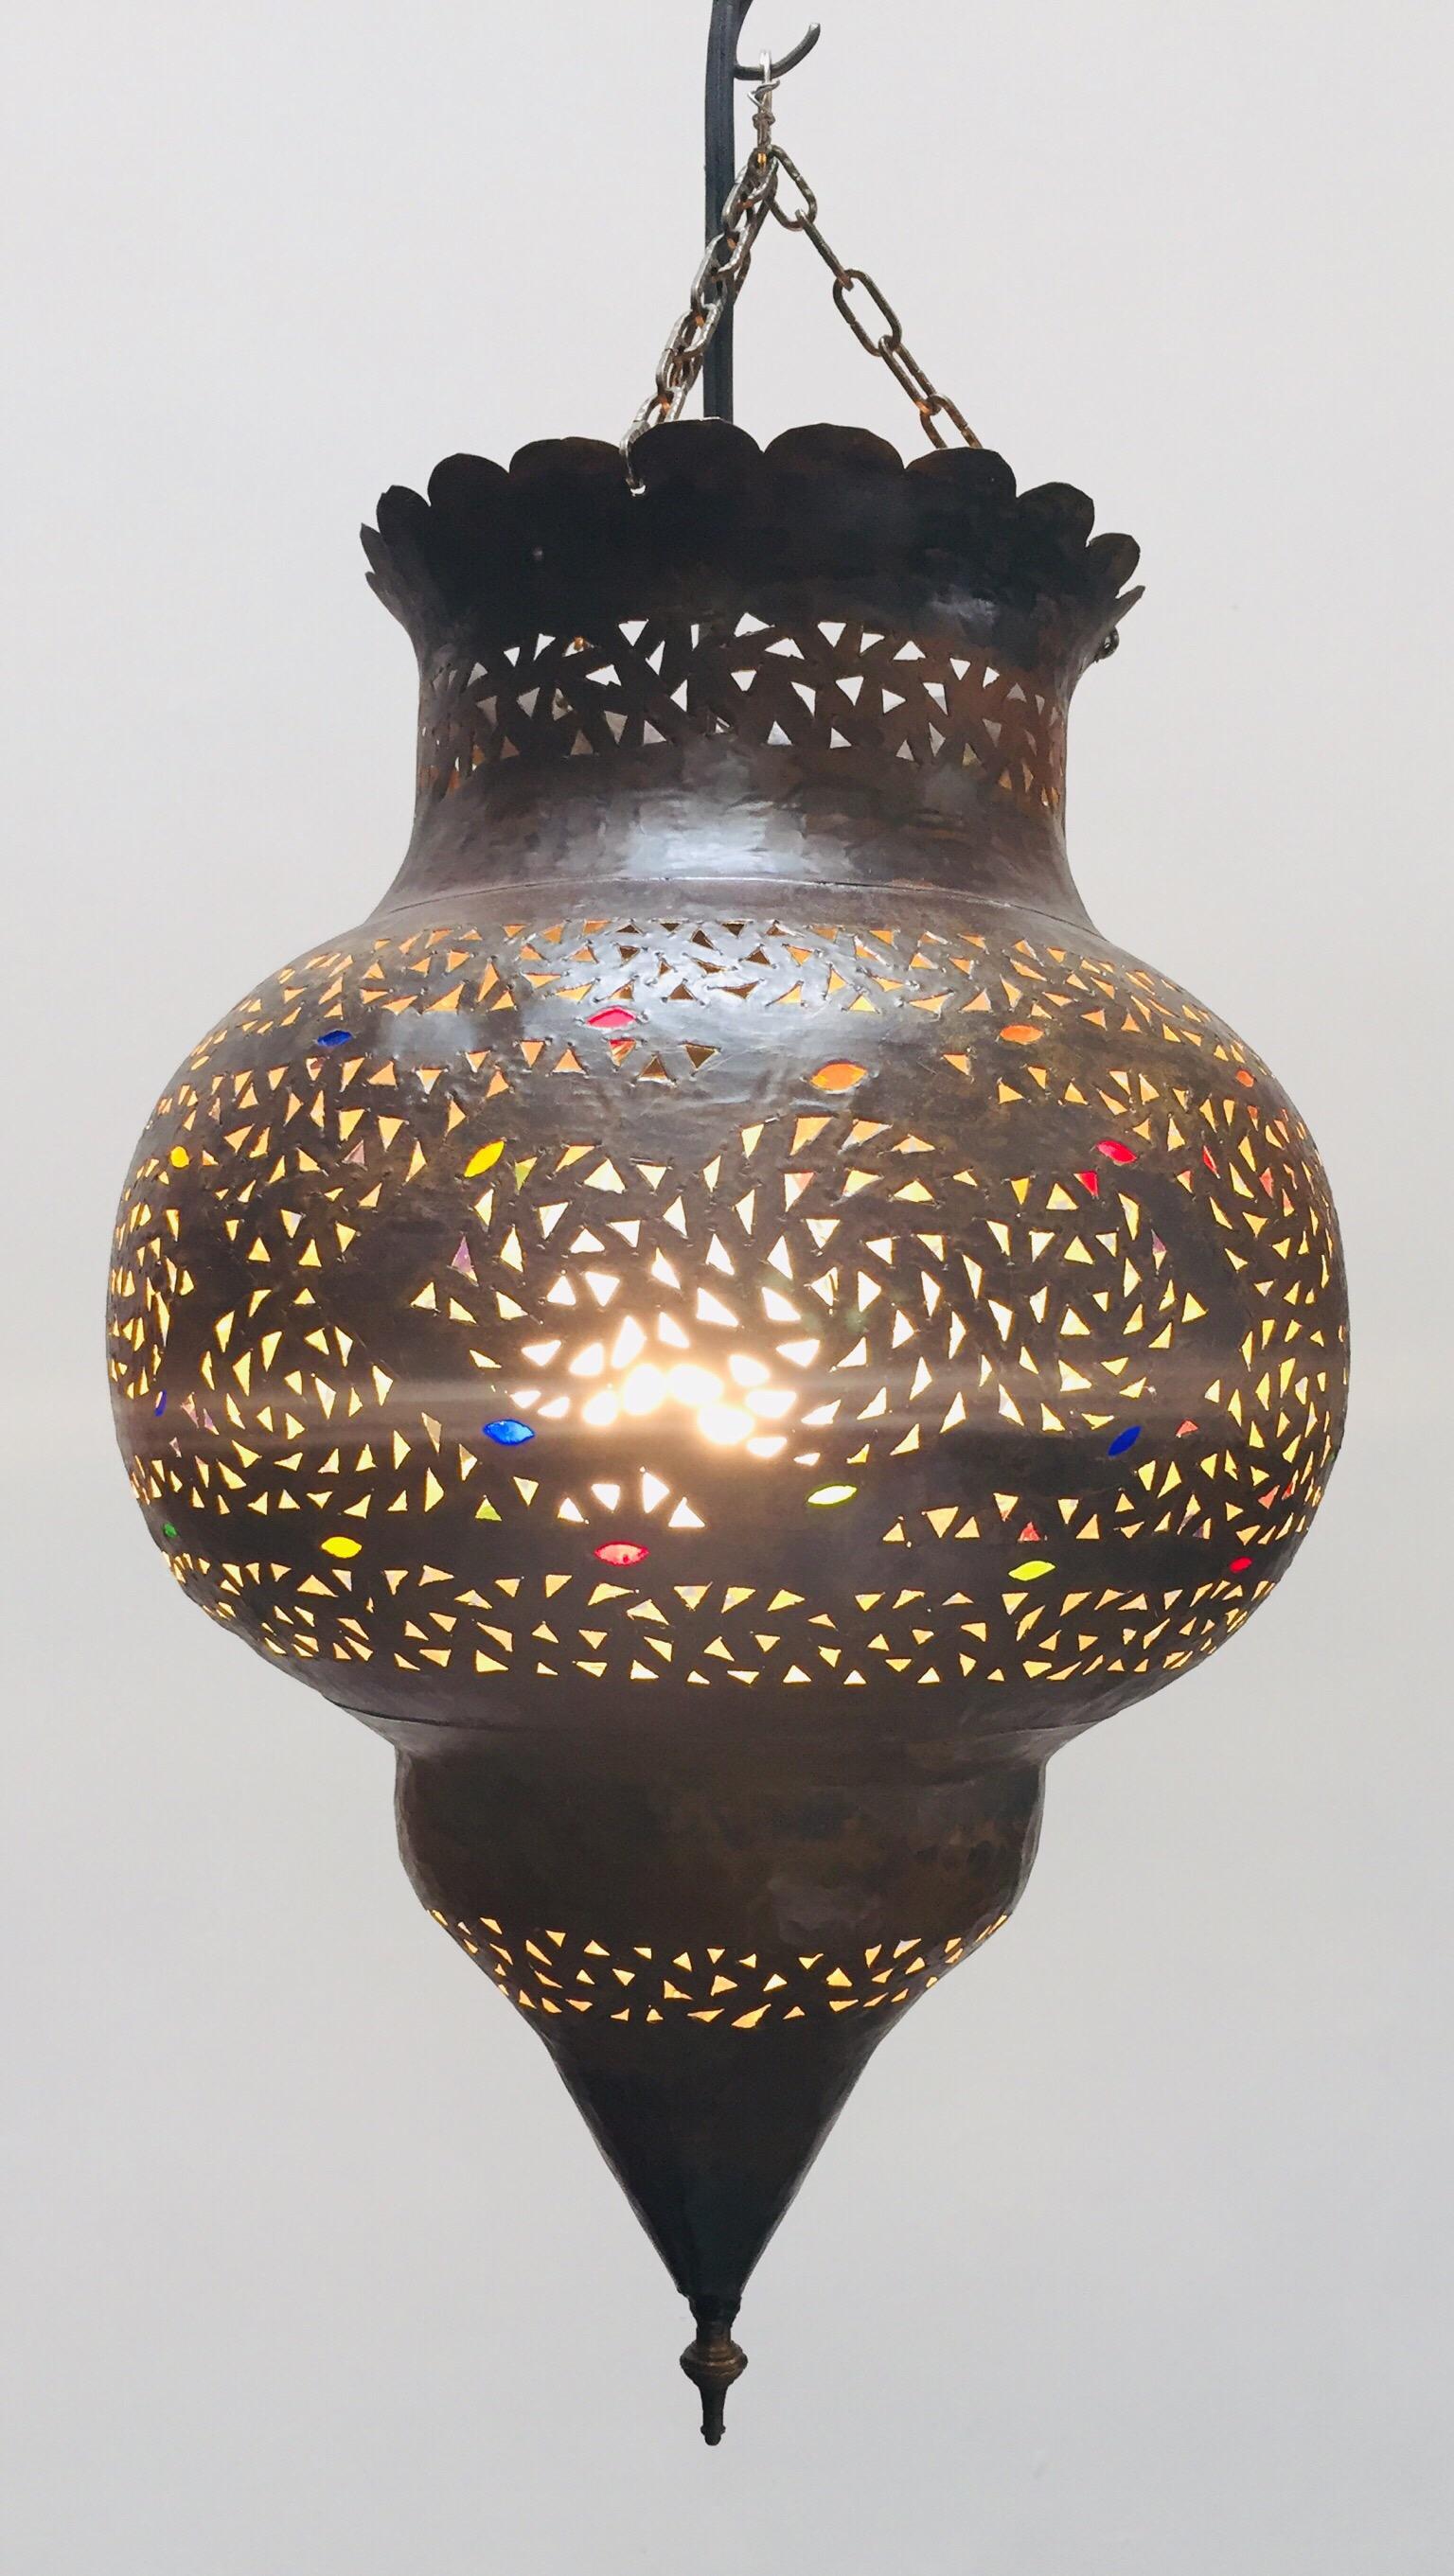 Stylish handcrafted Moroccan lantern pendant with multi-color molded glass and metal with an antique bronze finish.
Handmade with small cut-glass with Moorish filigree open metal work Moorish design.
Comes with a black cord for one light bulb,